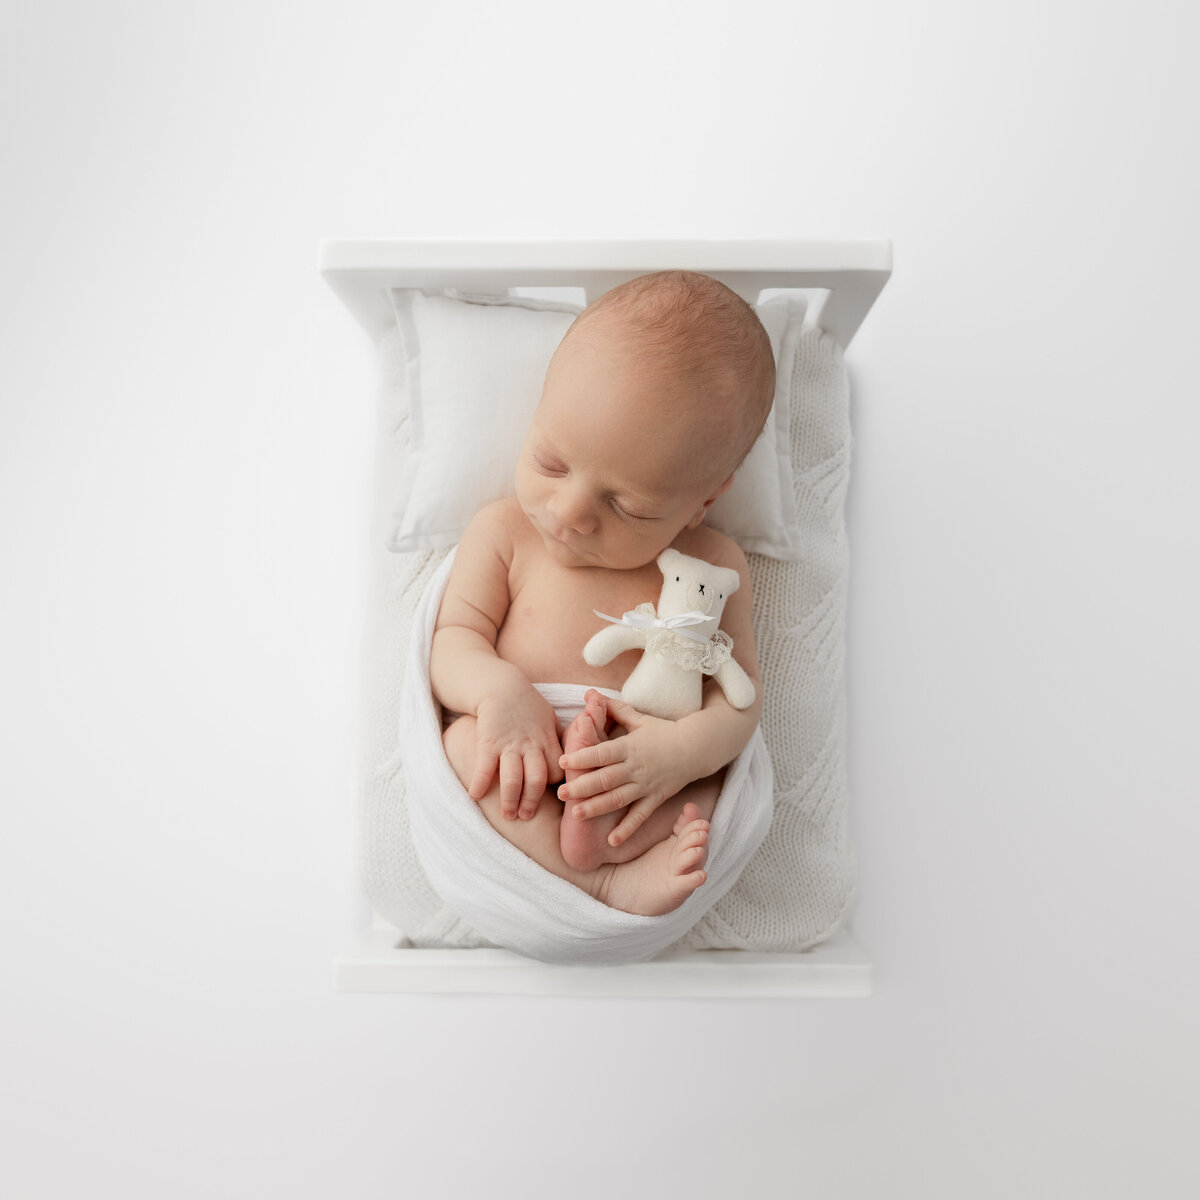 Image is of a newborn baby in a newborn photography prop bed - this bed is hand crafted in tasmania by The Little Shed Project.  Image by Lauren Vanier Photography